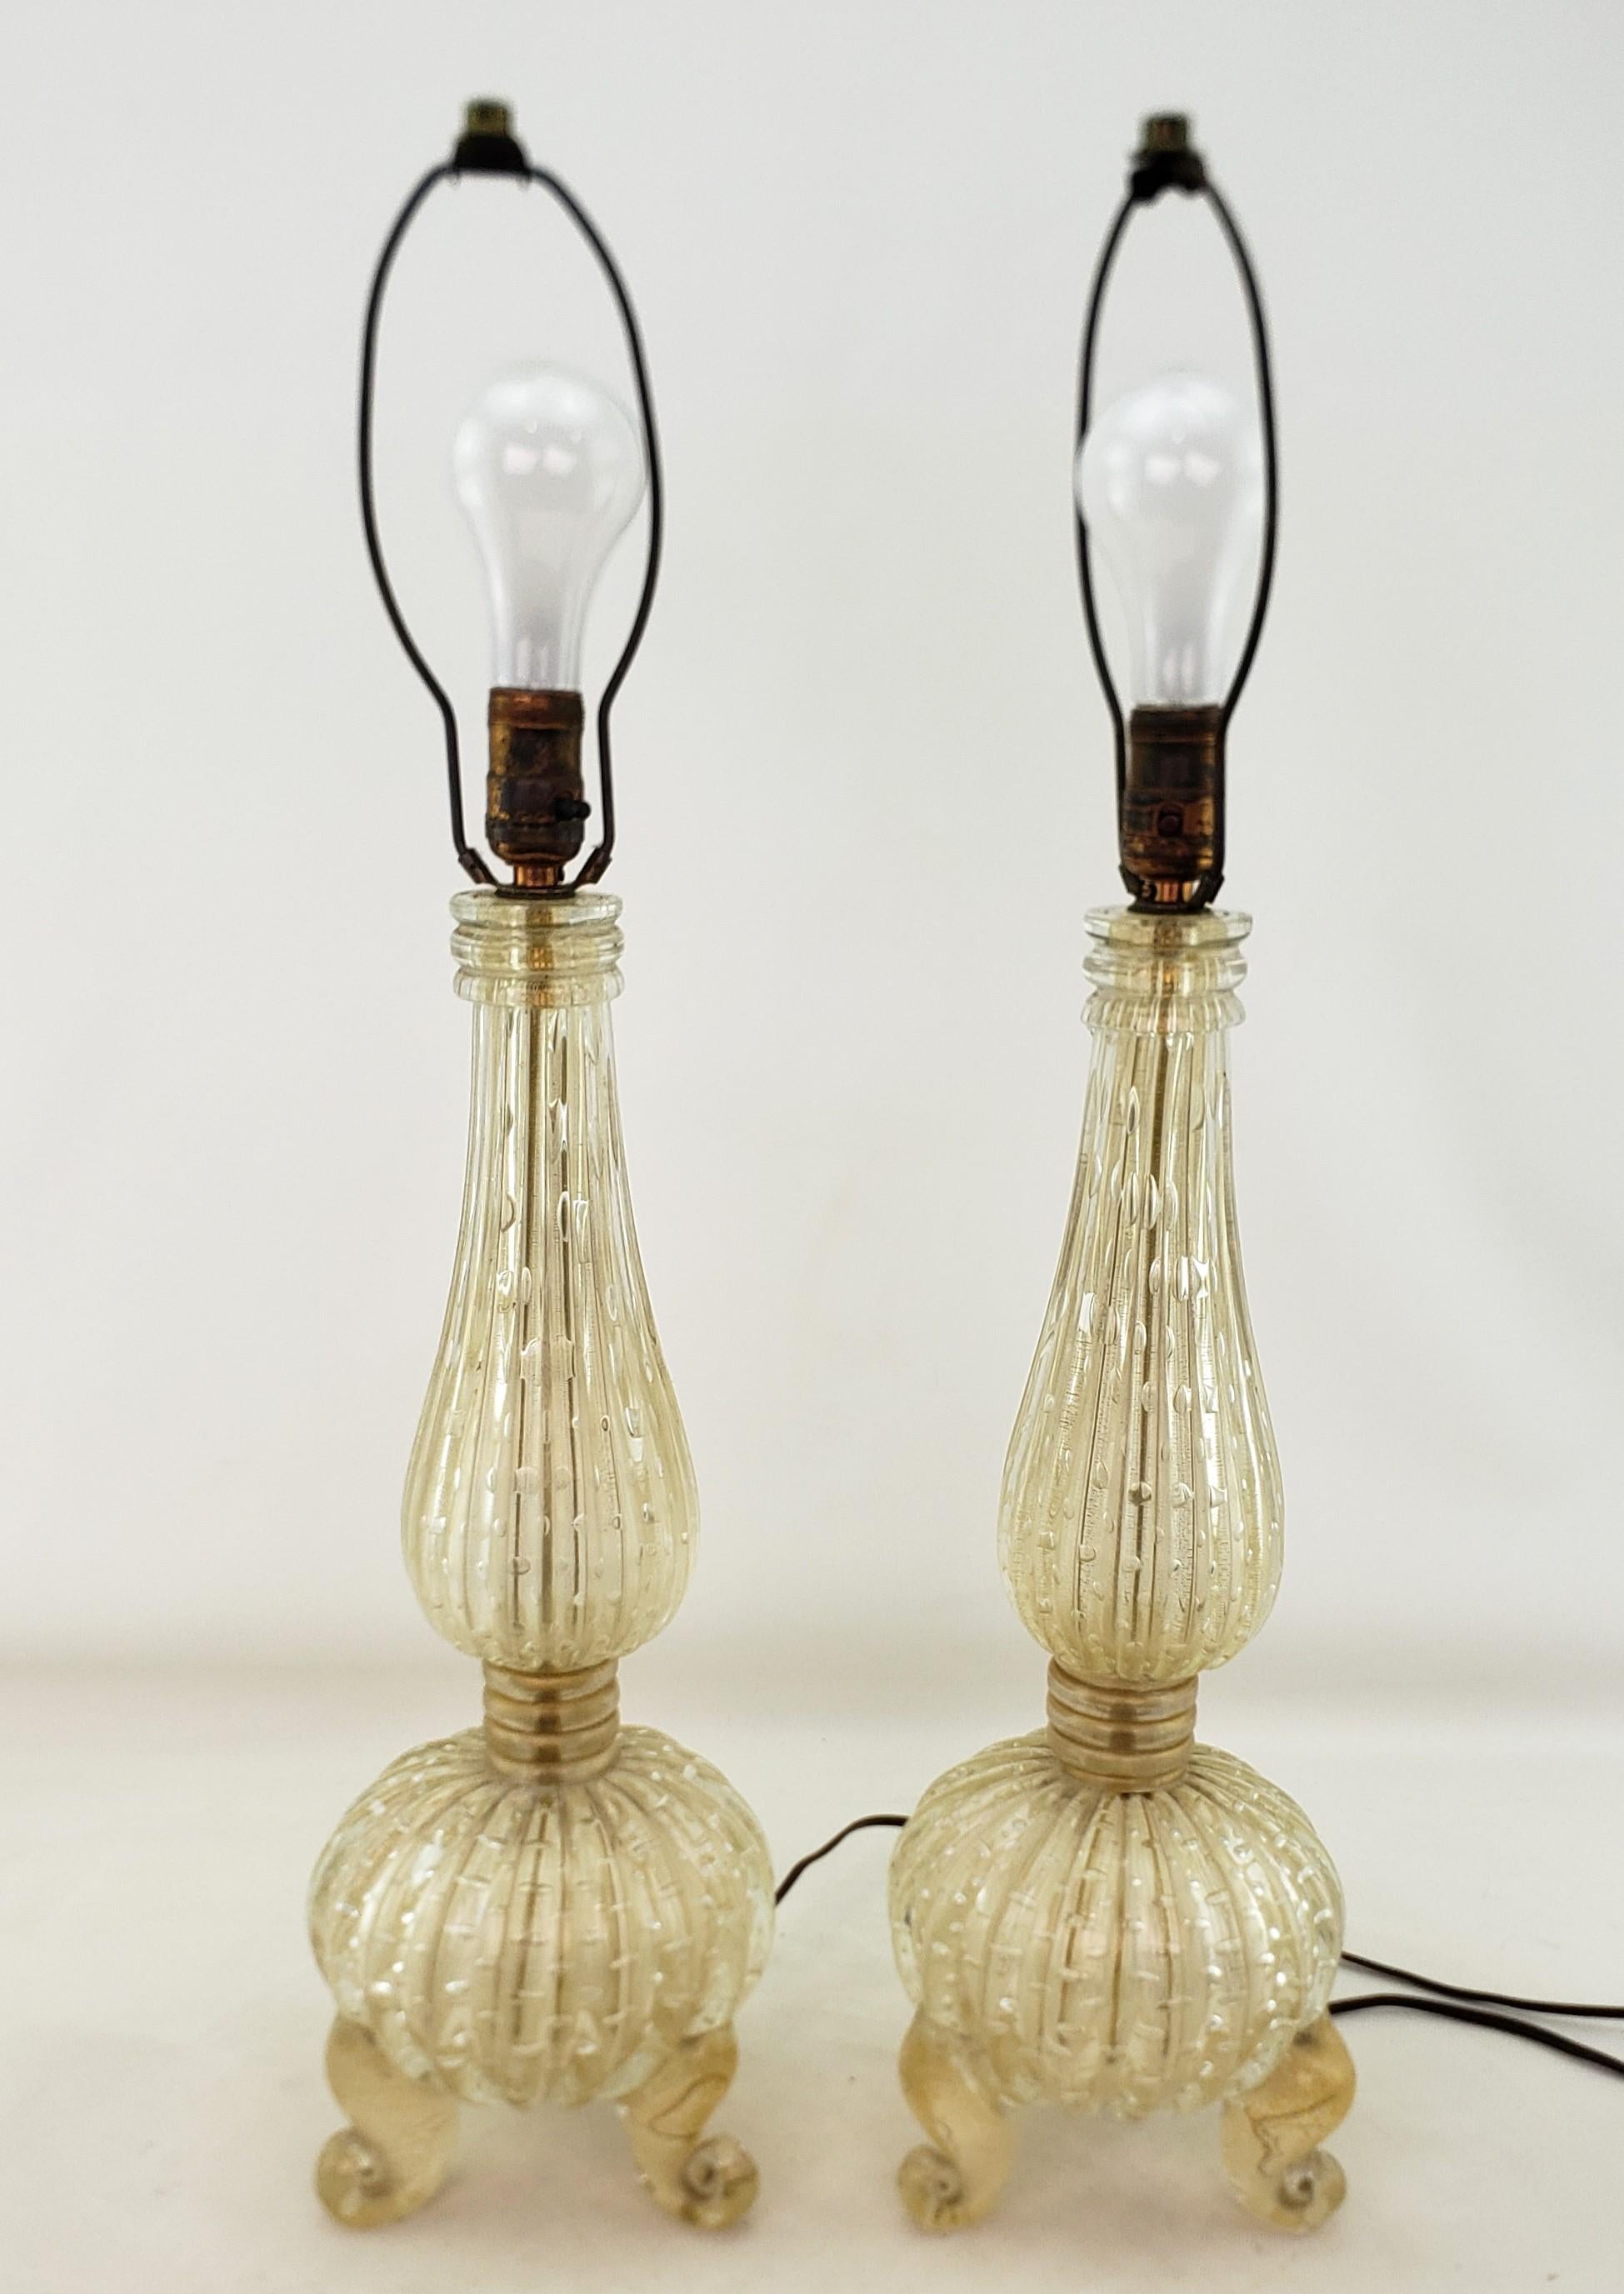 Pair of BarovierAttributed  Mid-Century Modern Murano Art Glass Table Lamps  For Sale 3